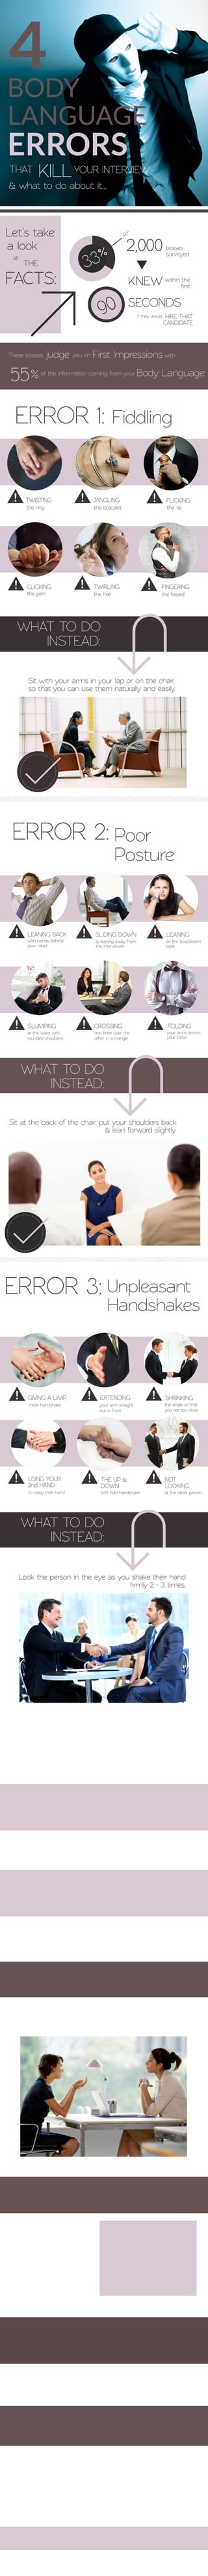 4 Body Language Errors that Kill your Interview